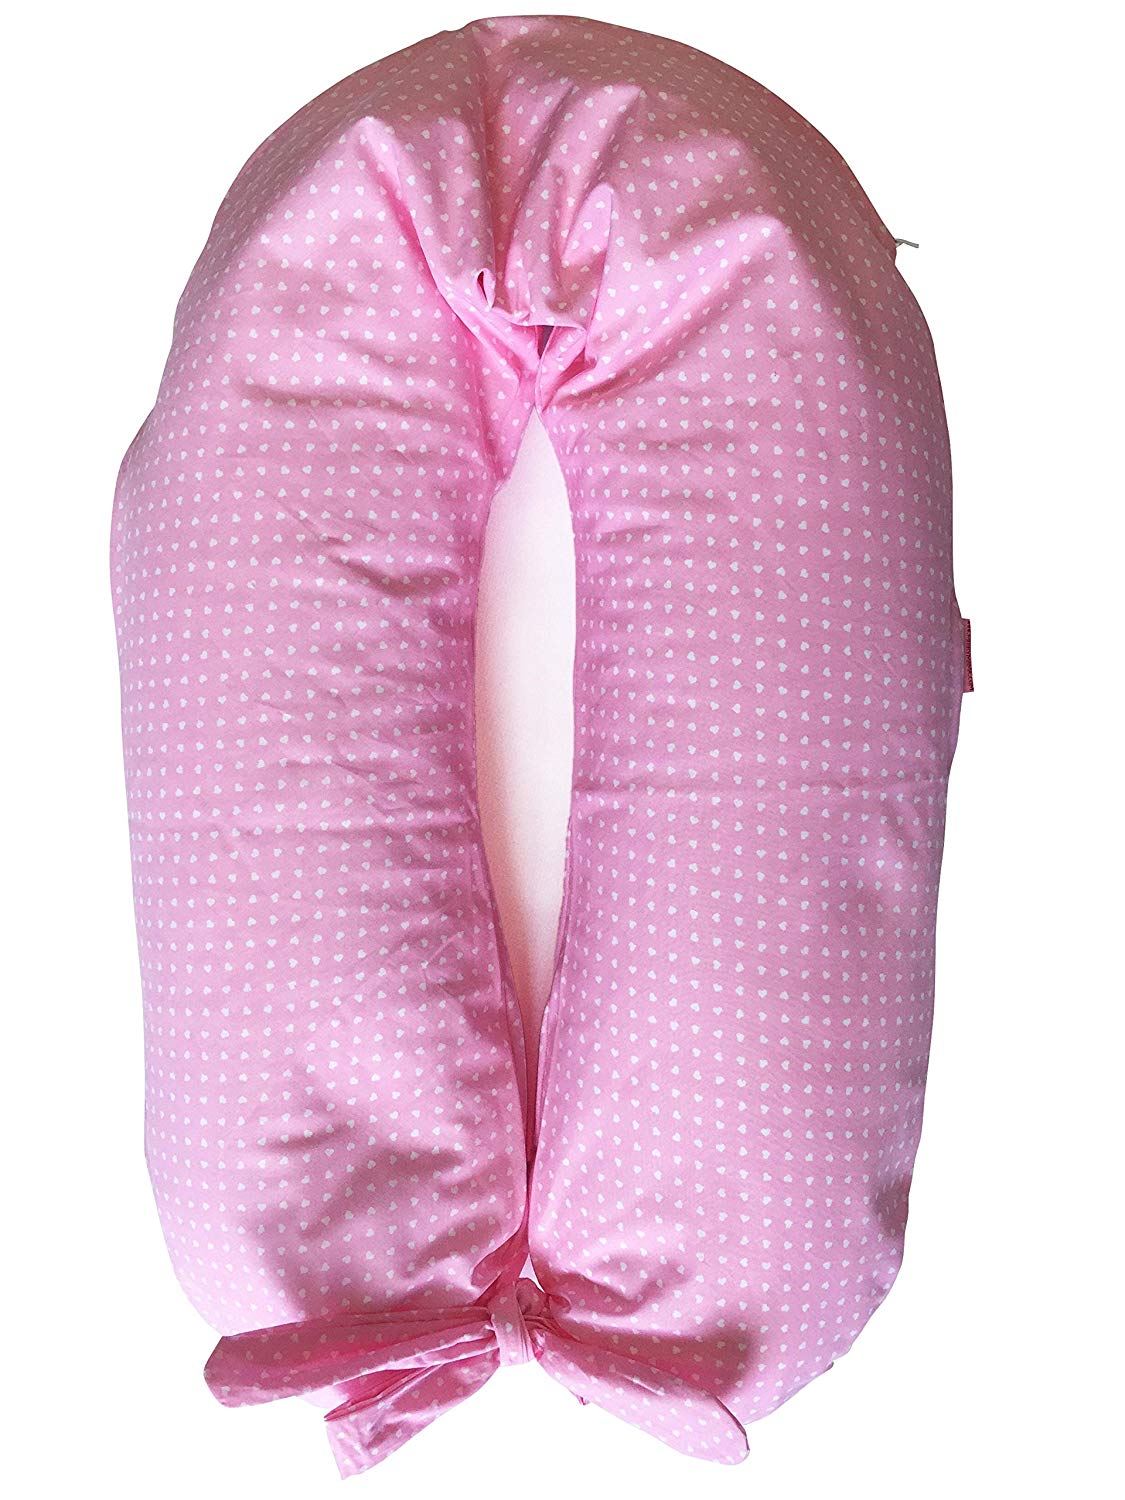 Merrymama – Nursing Pillow And Pregnancy Filled with Polystyrene Balls Filling with Ties/cm 190 mm Polystyrene Fire Retardant) pink